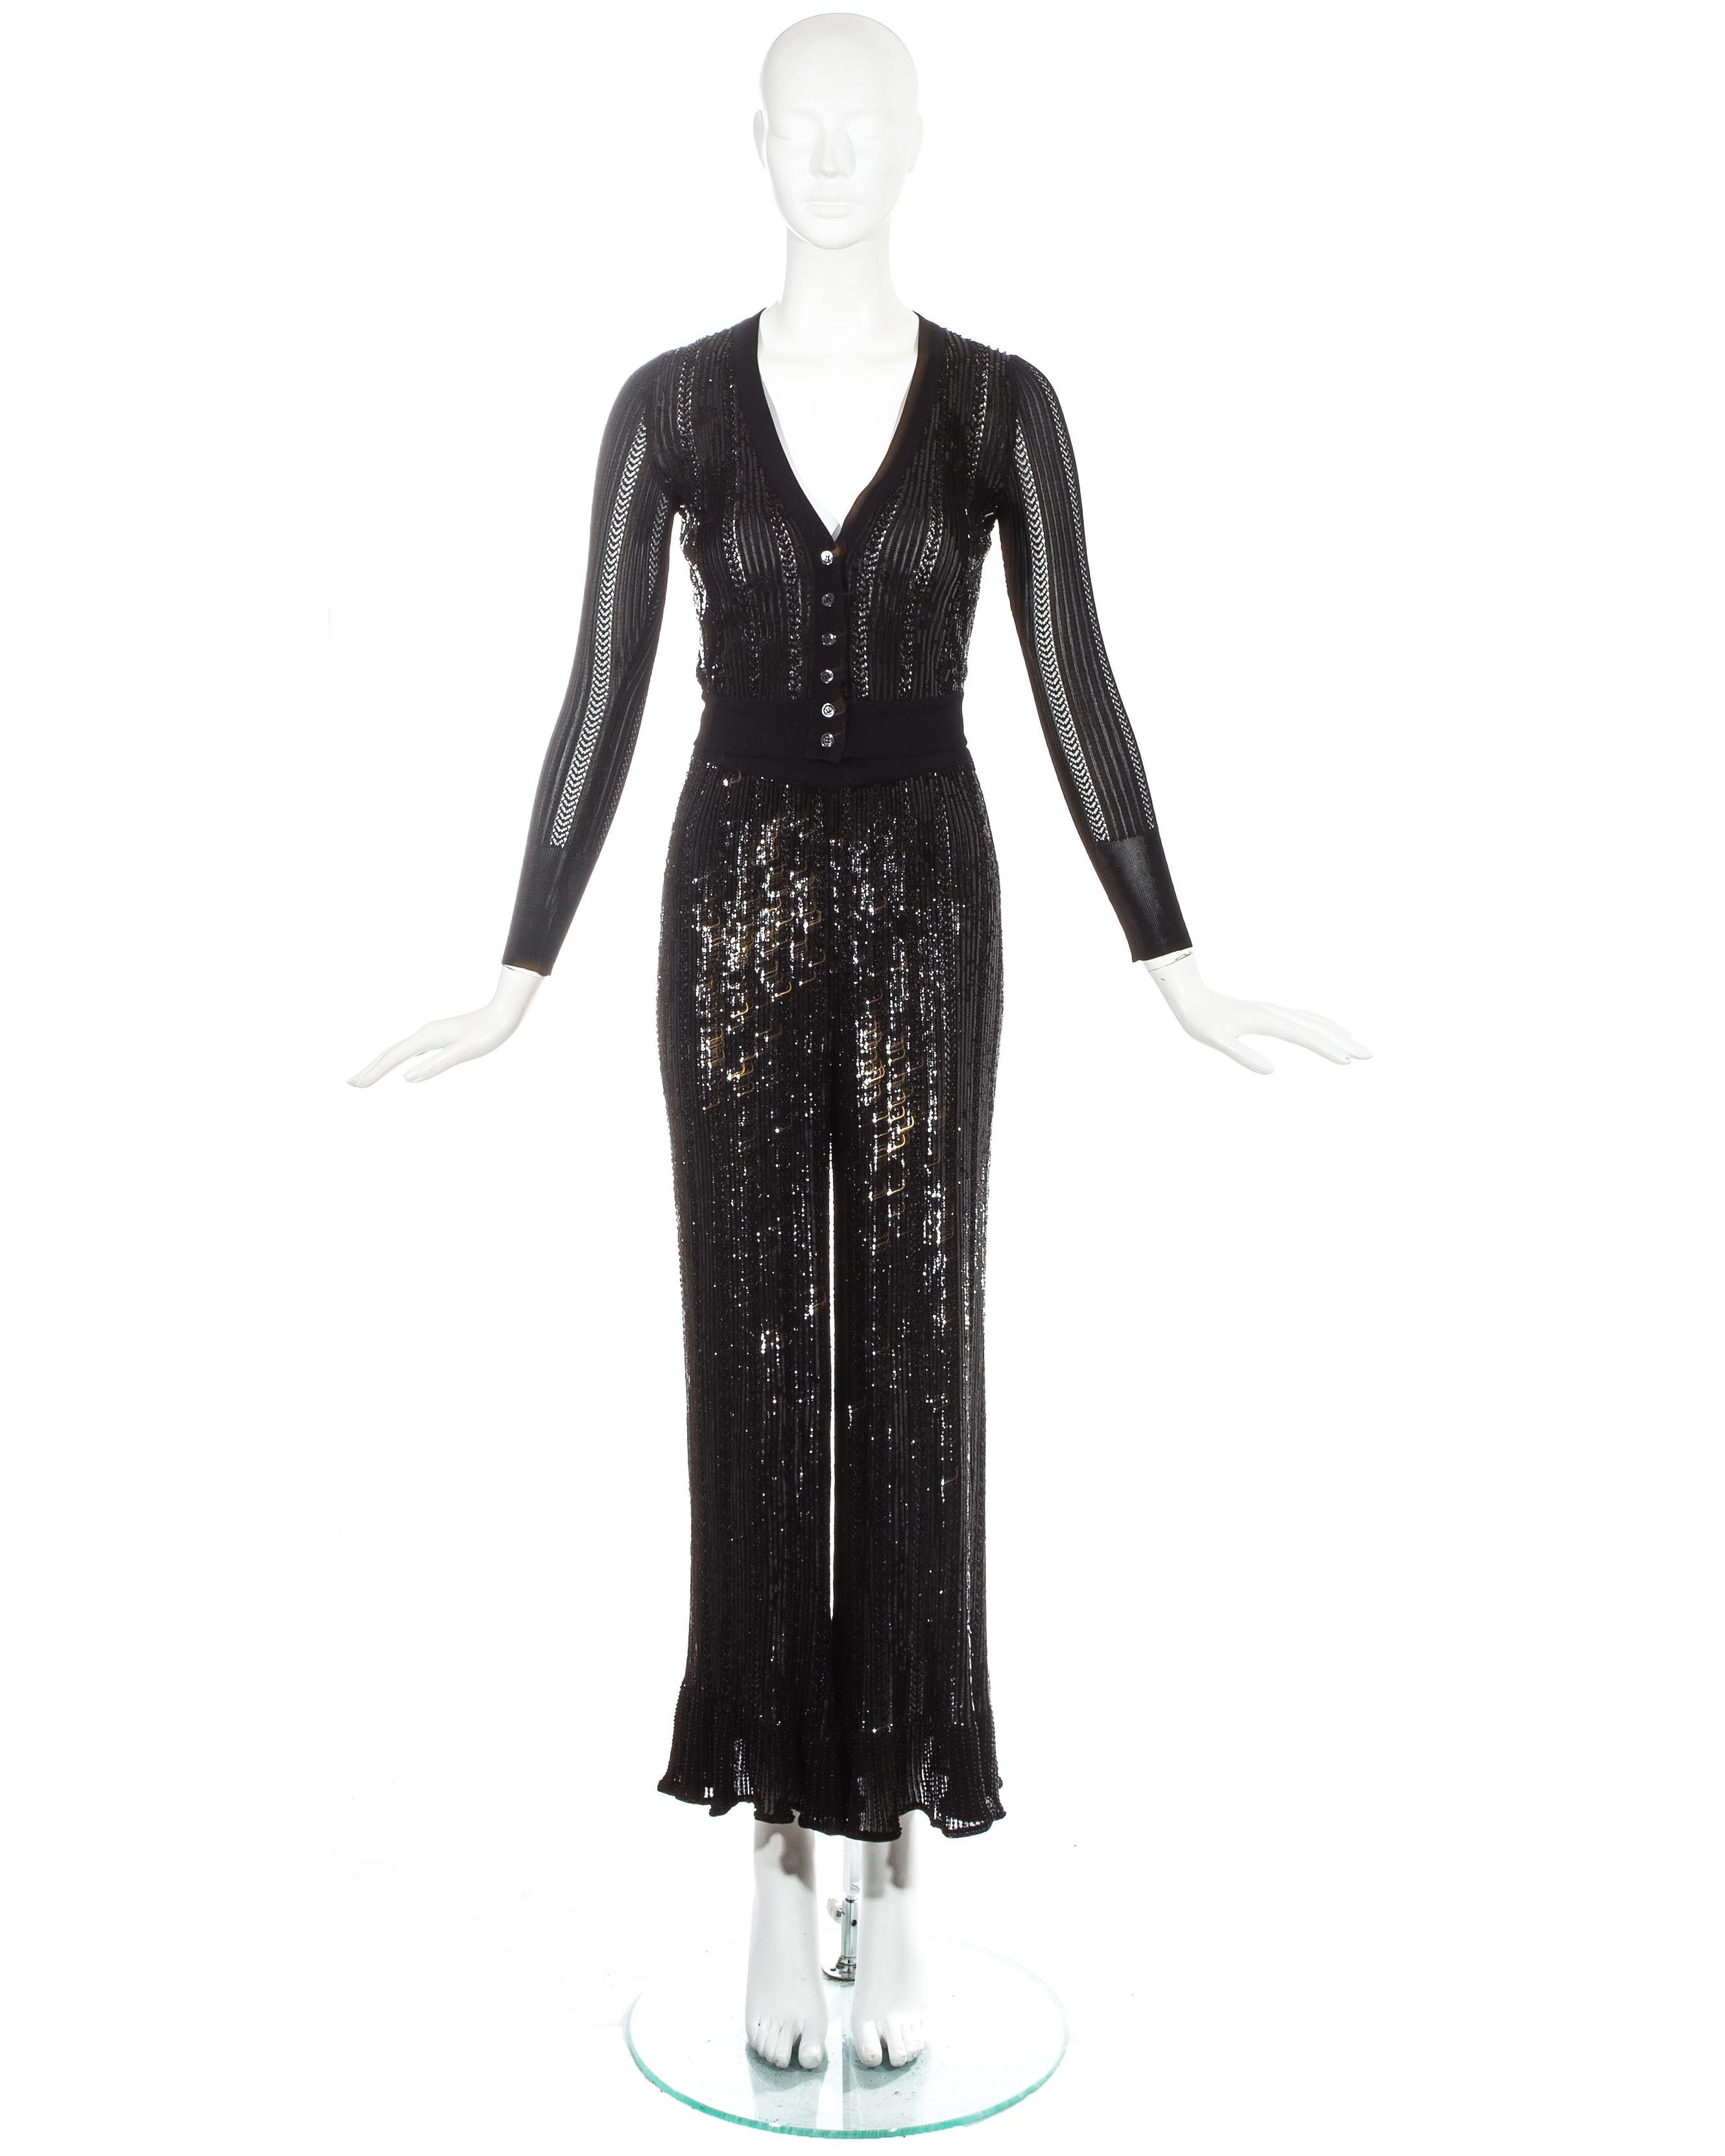 Azzedine Alaia black sequin and beaded 3-piece pant suit

- Fitted cardigan 
- High waisted flared pants 
- Additional matching bodysuit (not pictured) 

Spring-Summer 1996